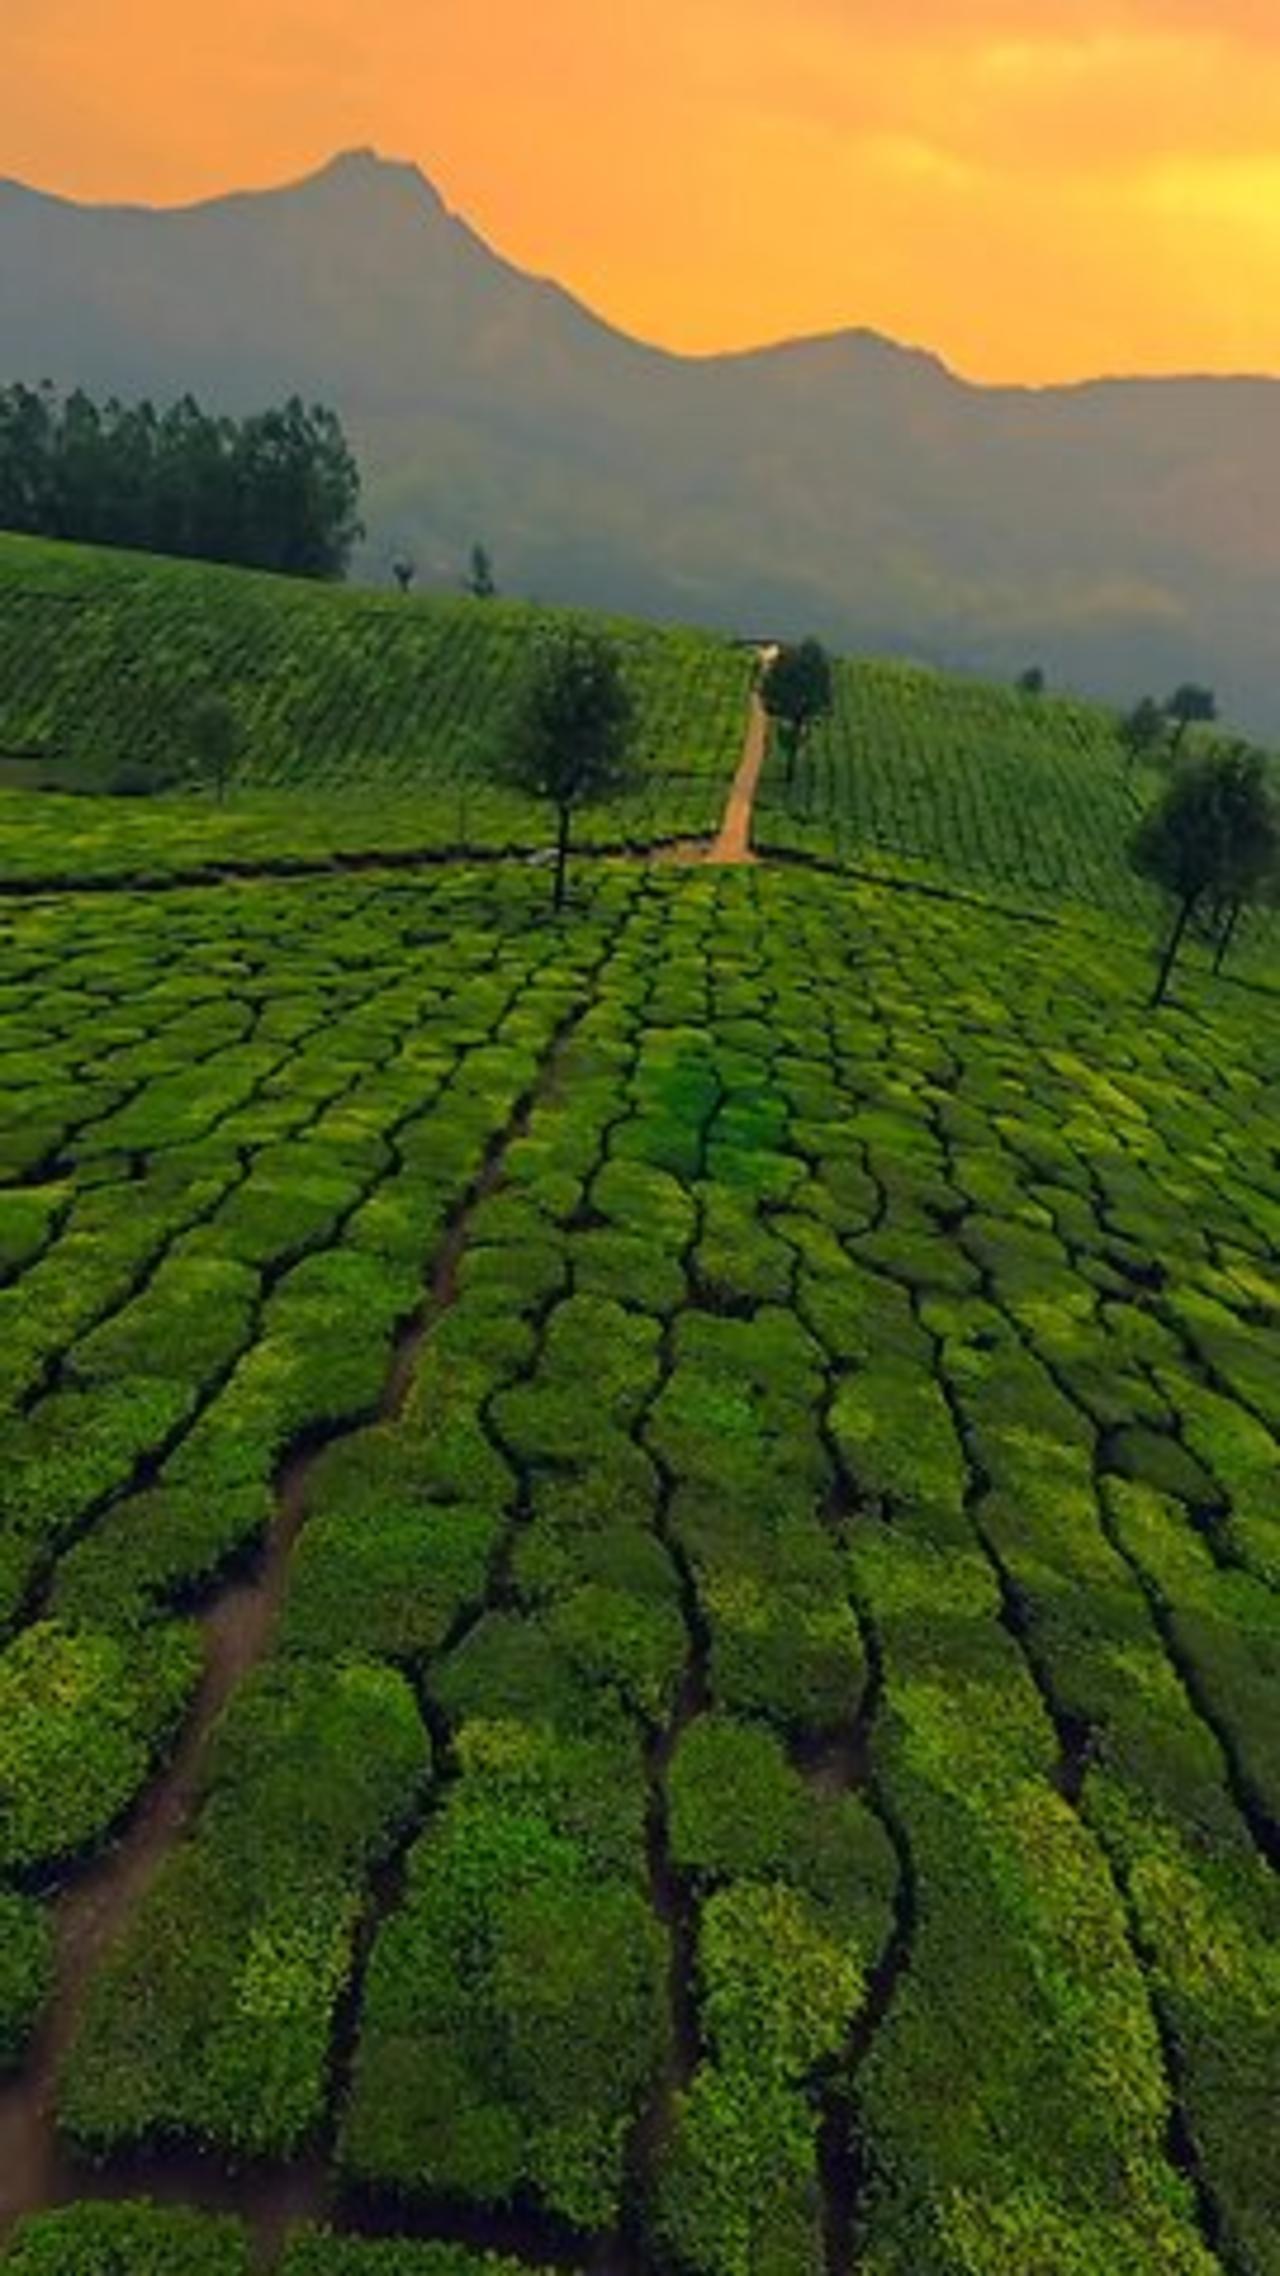 Exploring Munnar from a whole new perspective